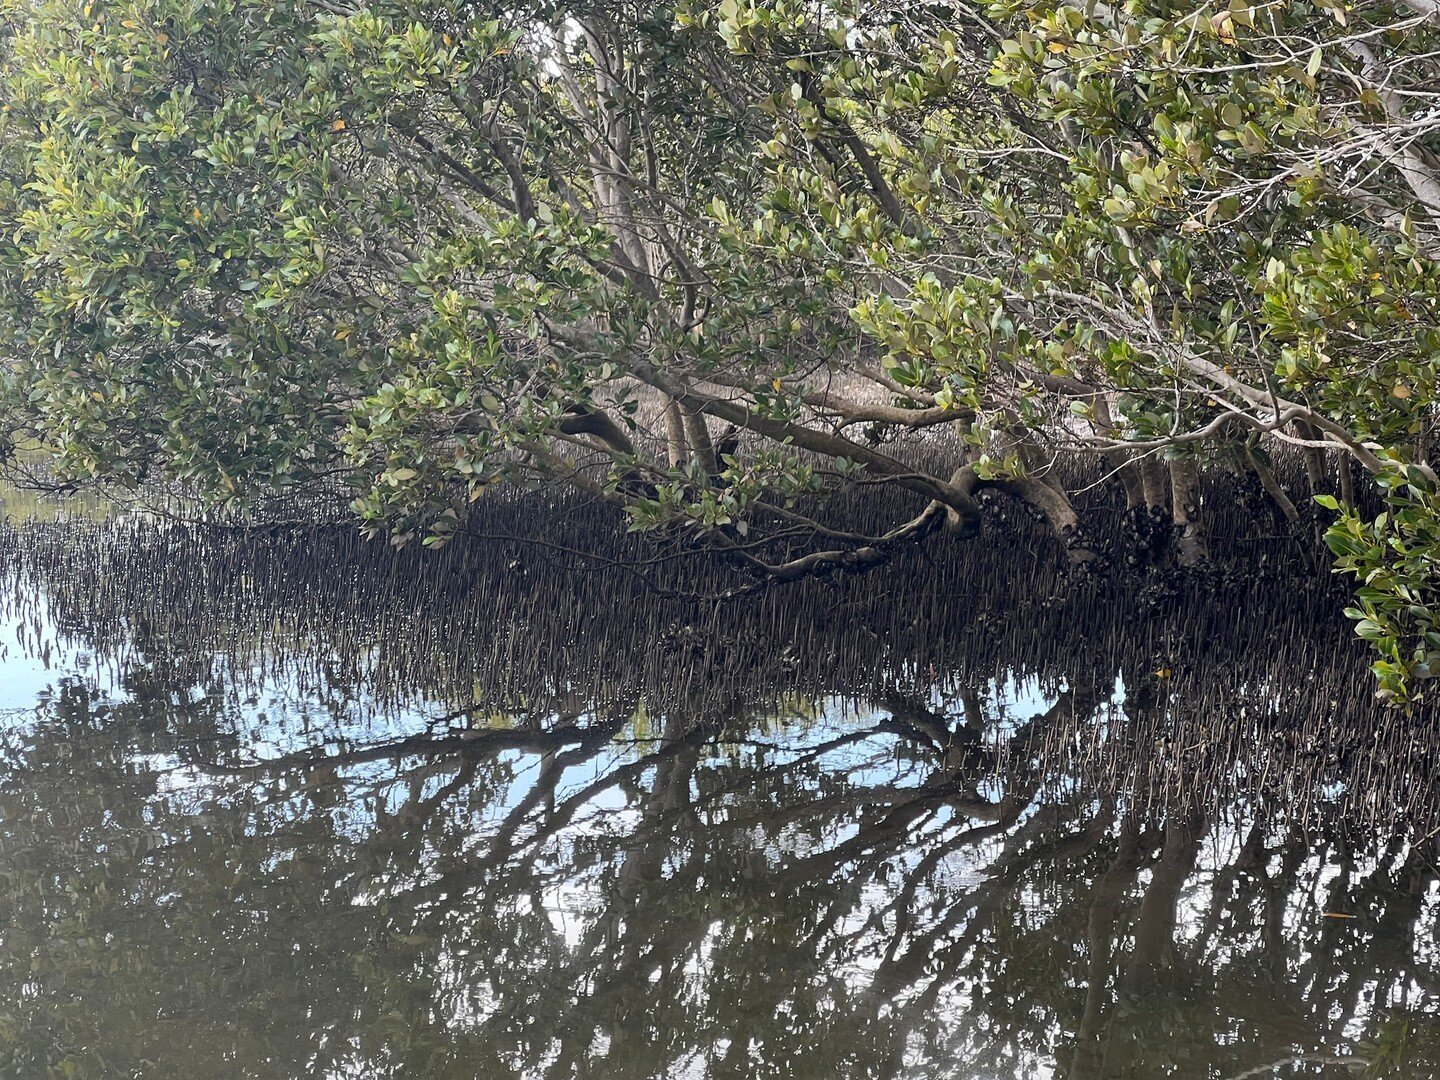 Lovely drawing class this week down on Jervis Bay near the Lady Denman Maritime Museum.⁣
Lovely built forms to draw but I cannot resist the mangroves ... the reflections, the water, the shapes of the leaves and trees - such a peaceful environment for